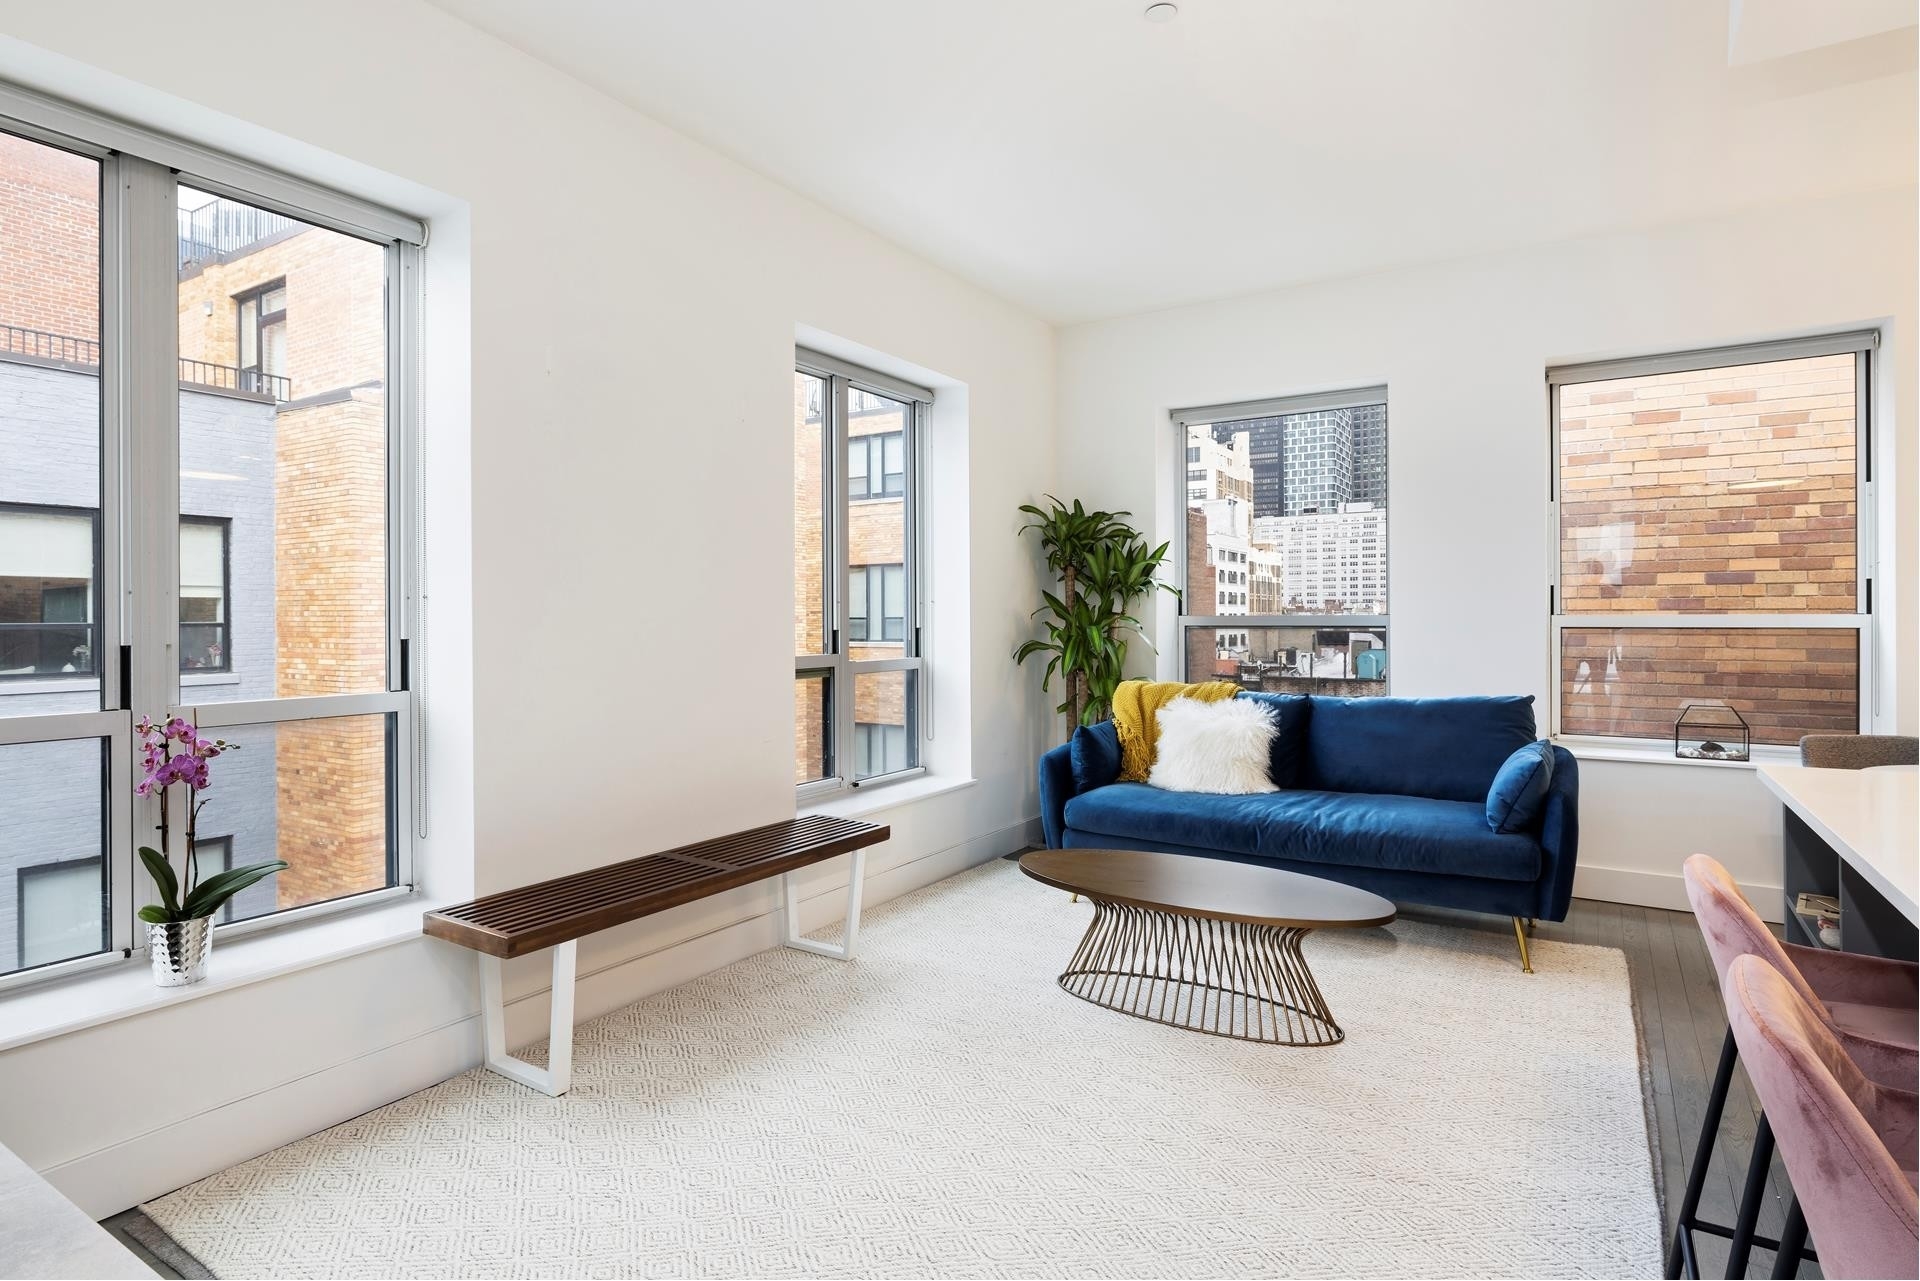 1. Condominiums for Sale at Nine52, 416 W 52ND ST, 708 Hell's Kitchen, New York, NY 10019